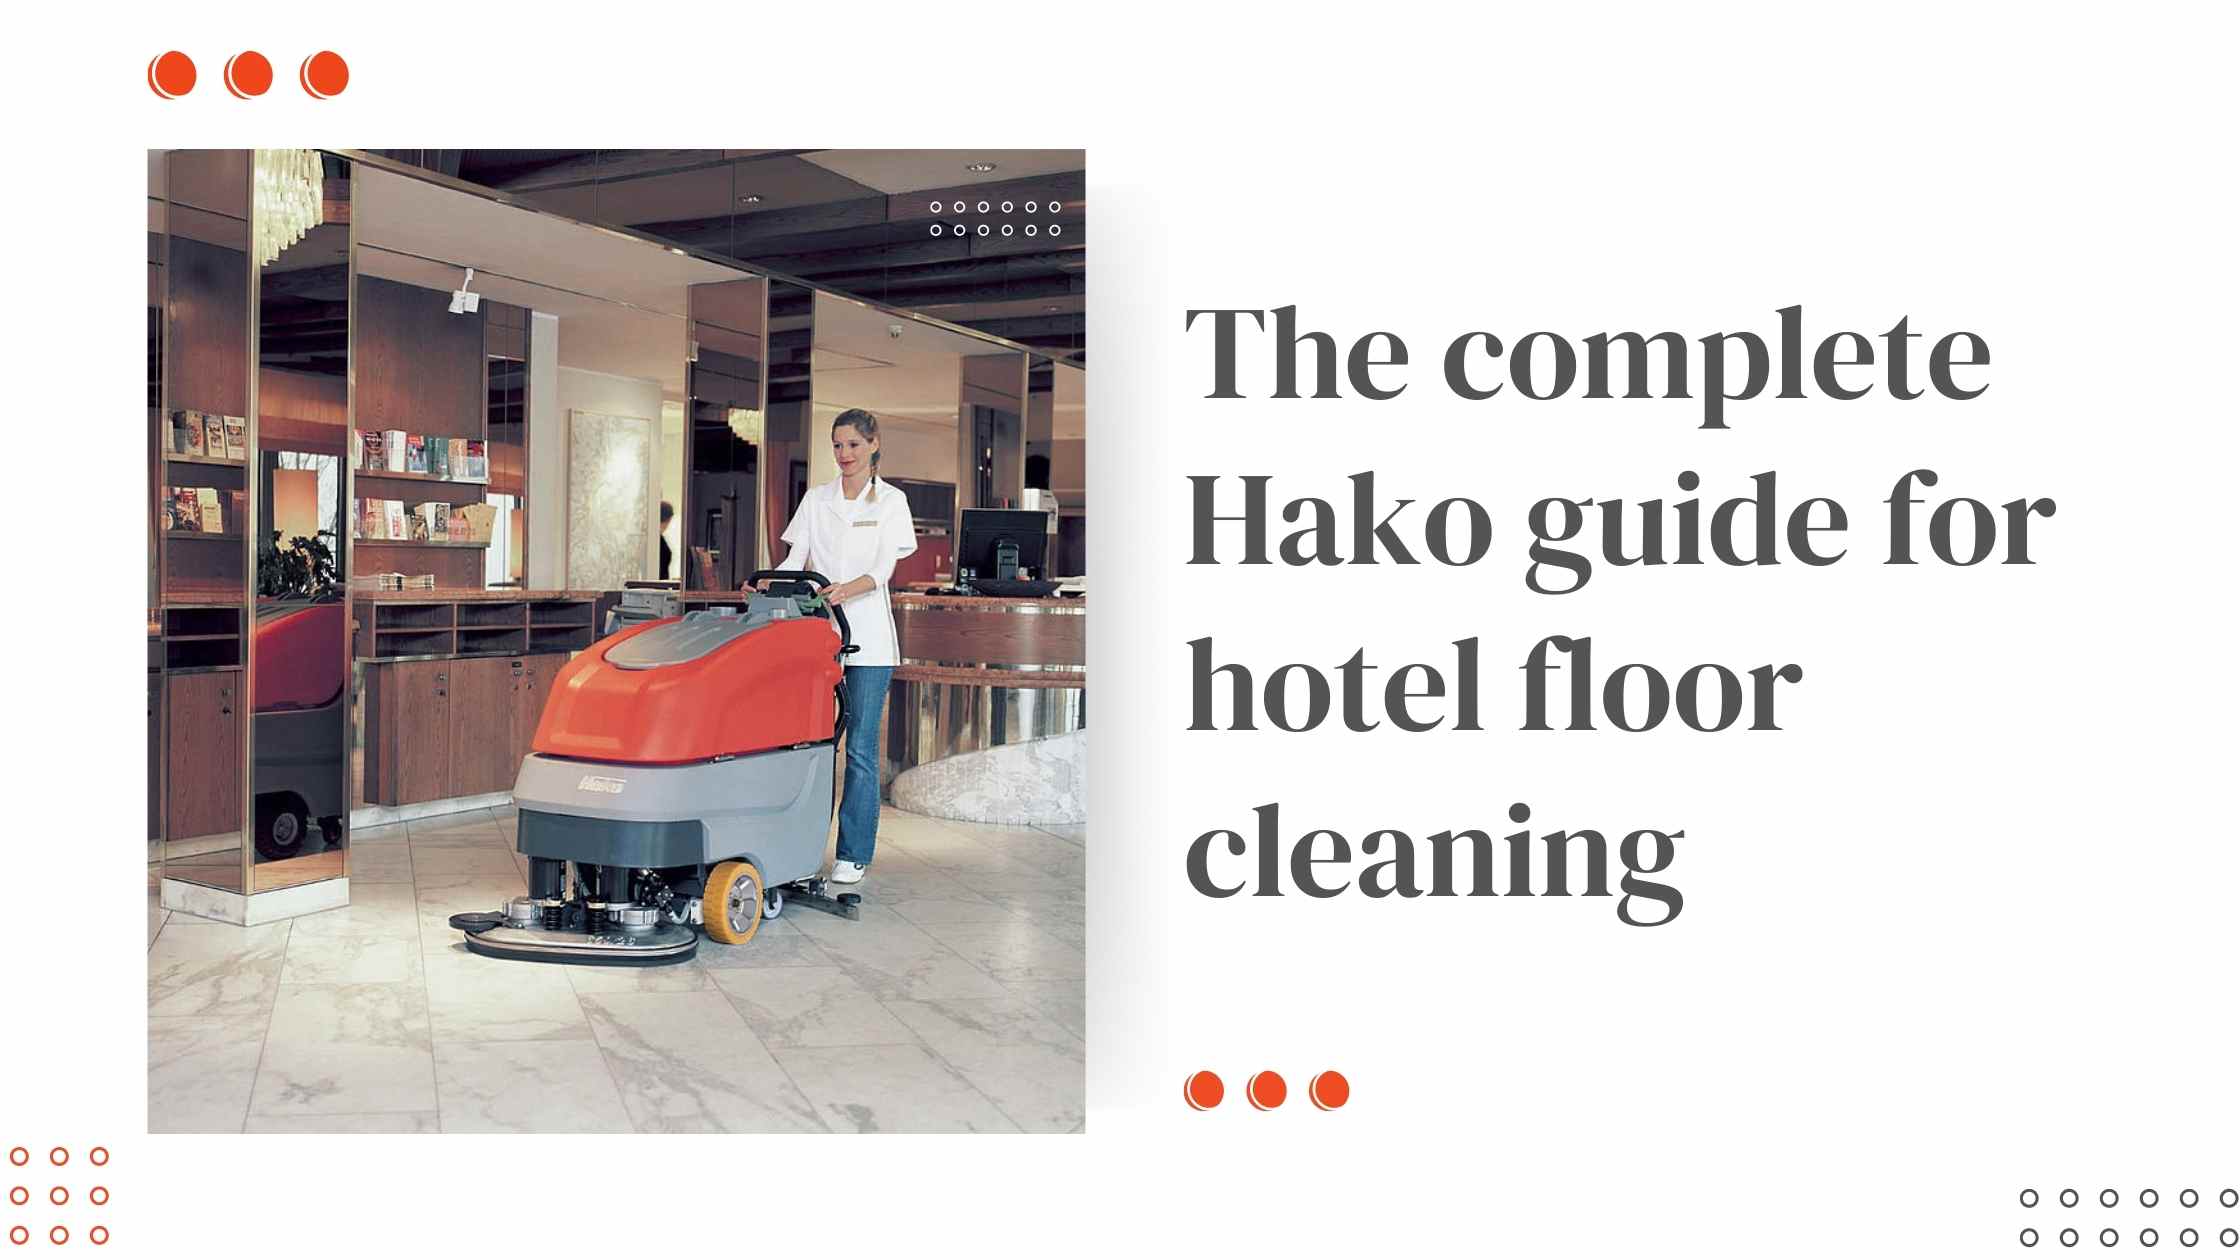 Hako guide for hotel floor cleaning